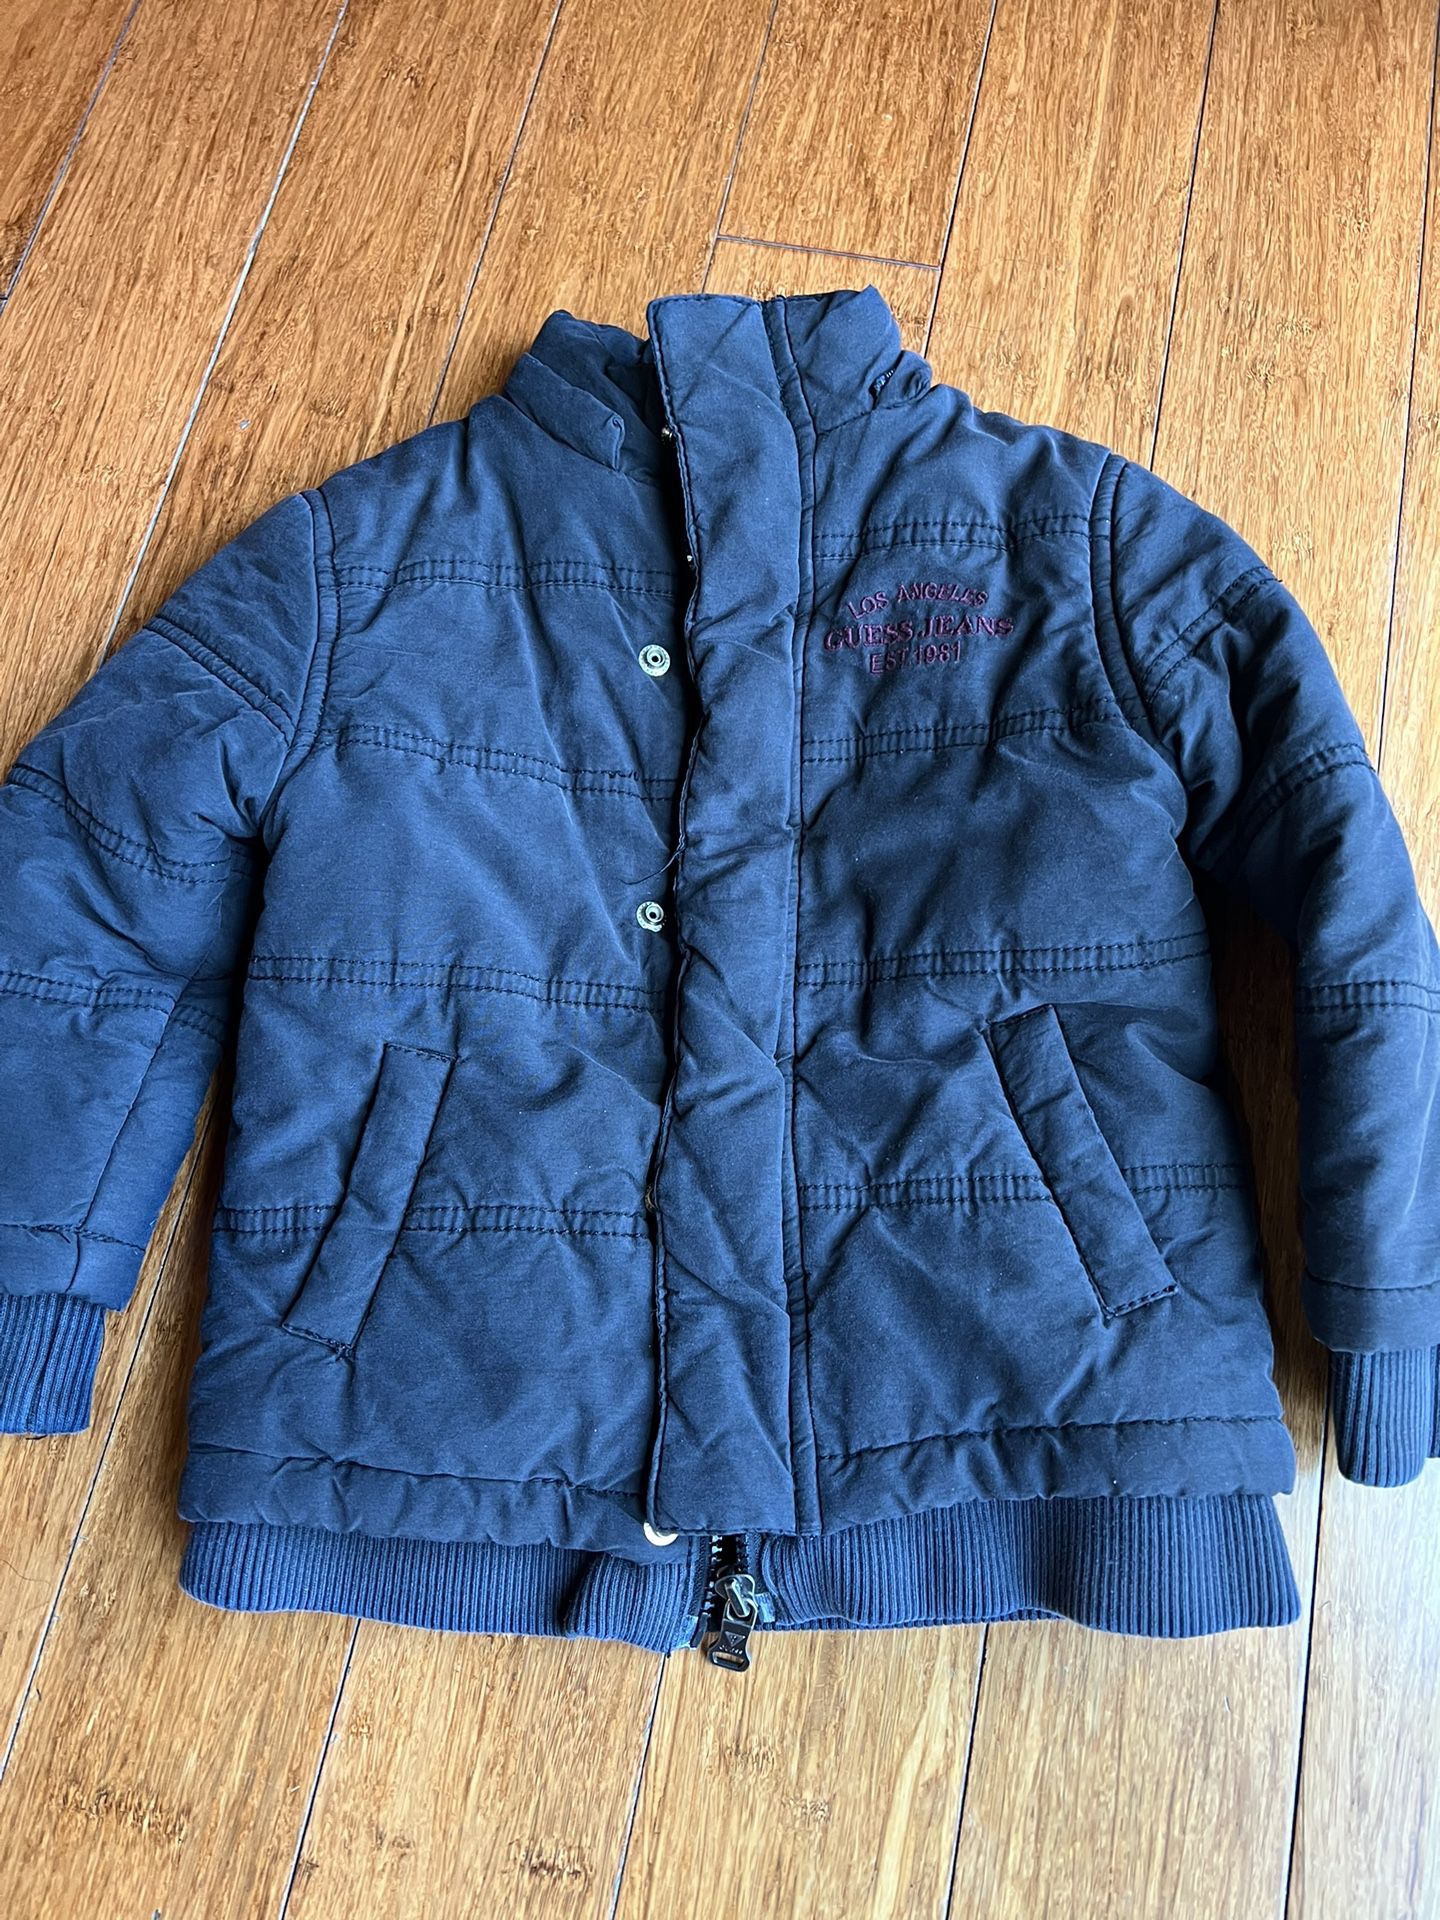 Guess Jacket For 4 Years Old 